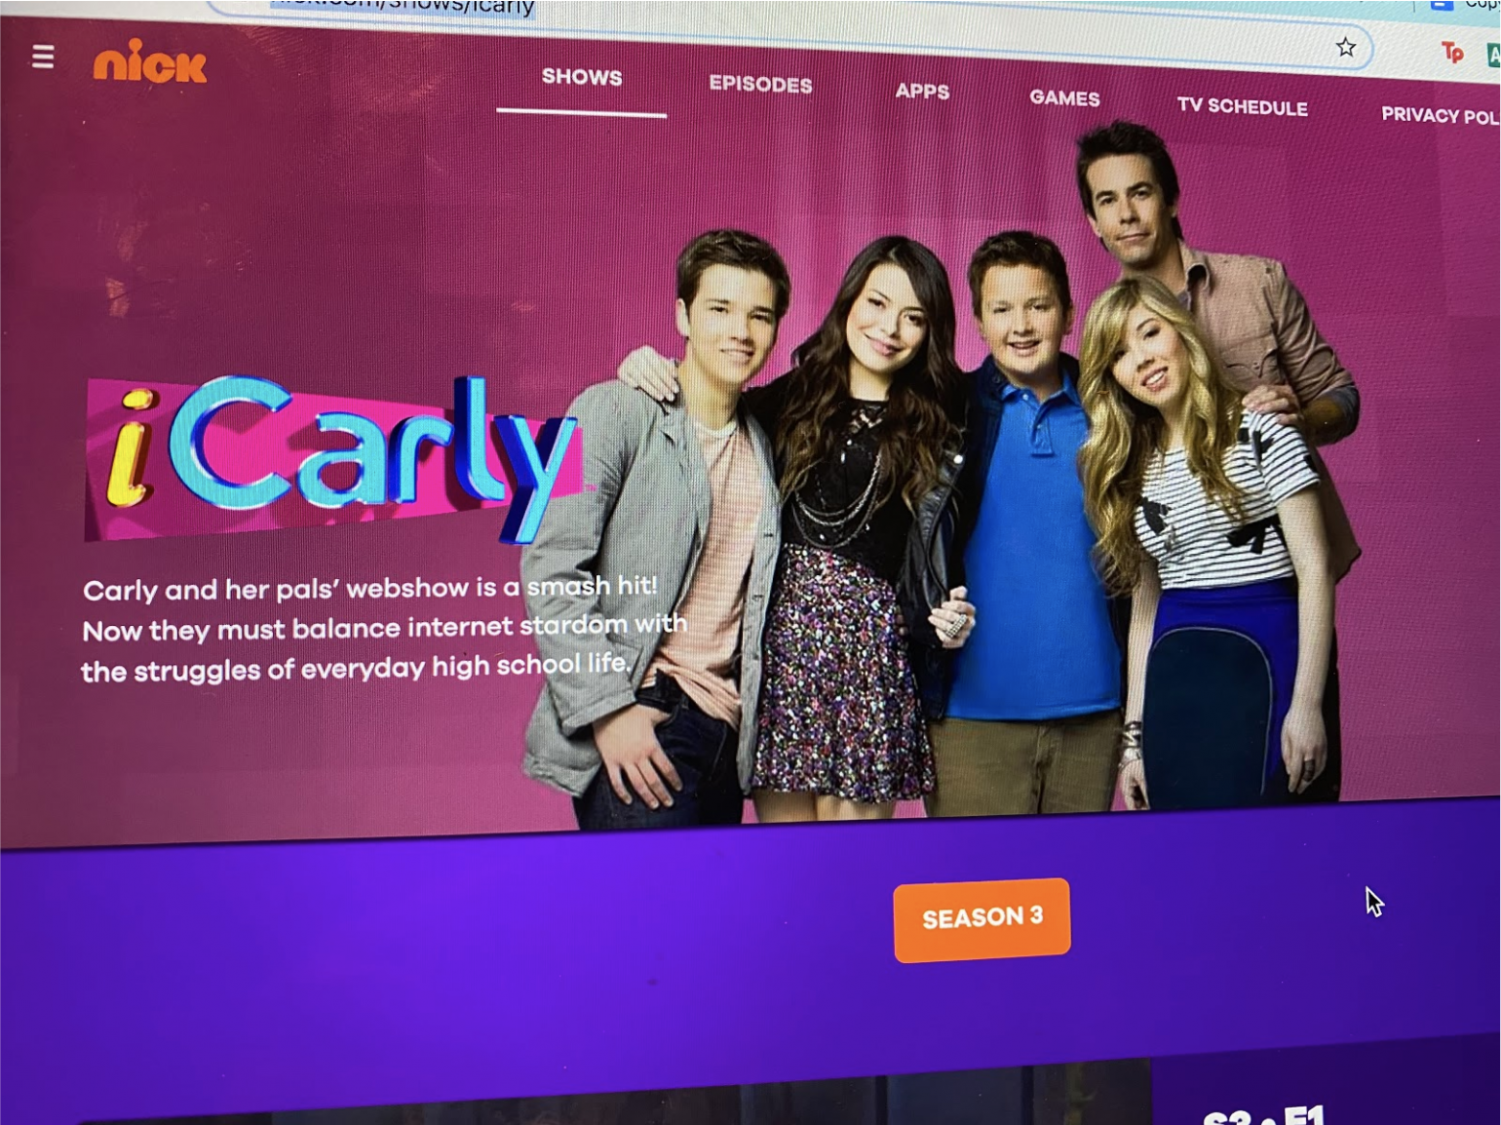 When does iCarly come out on Netflix?